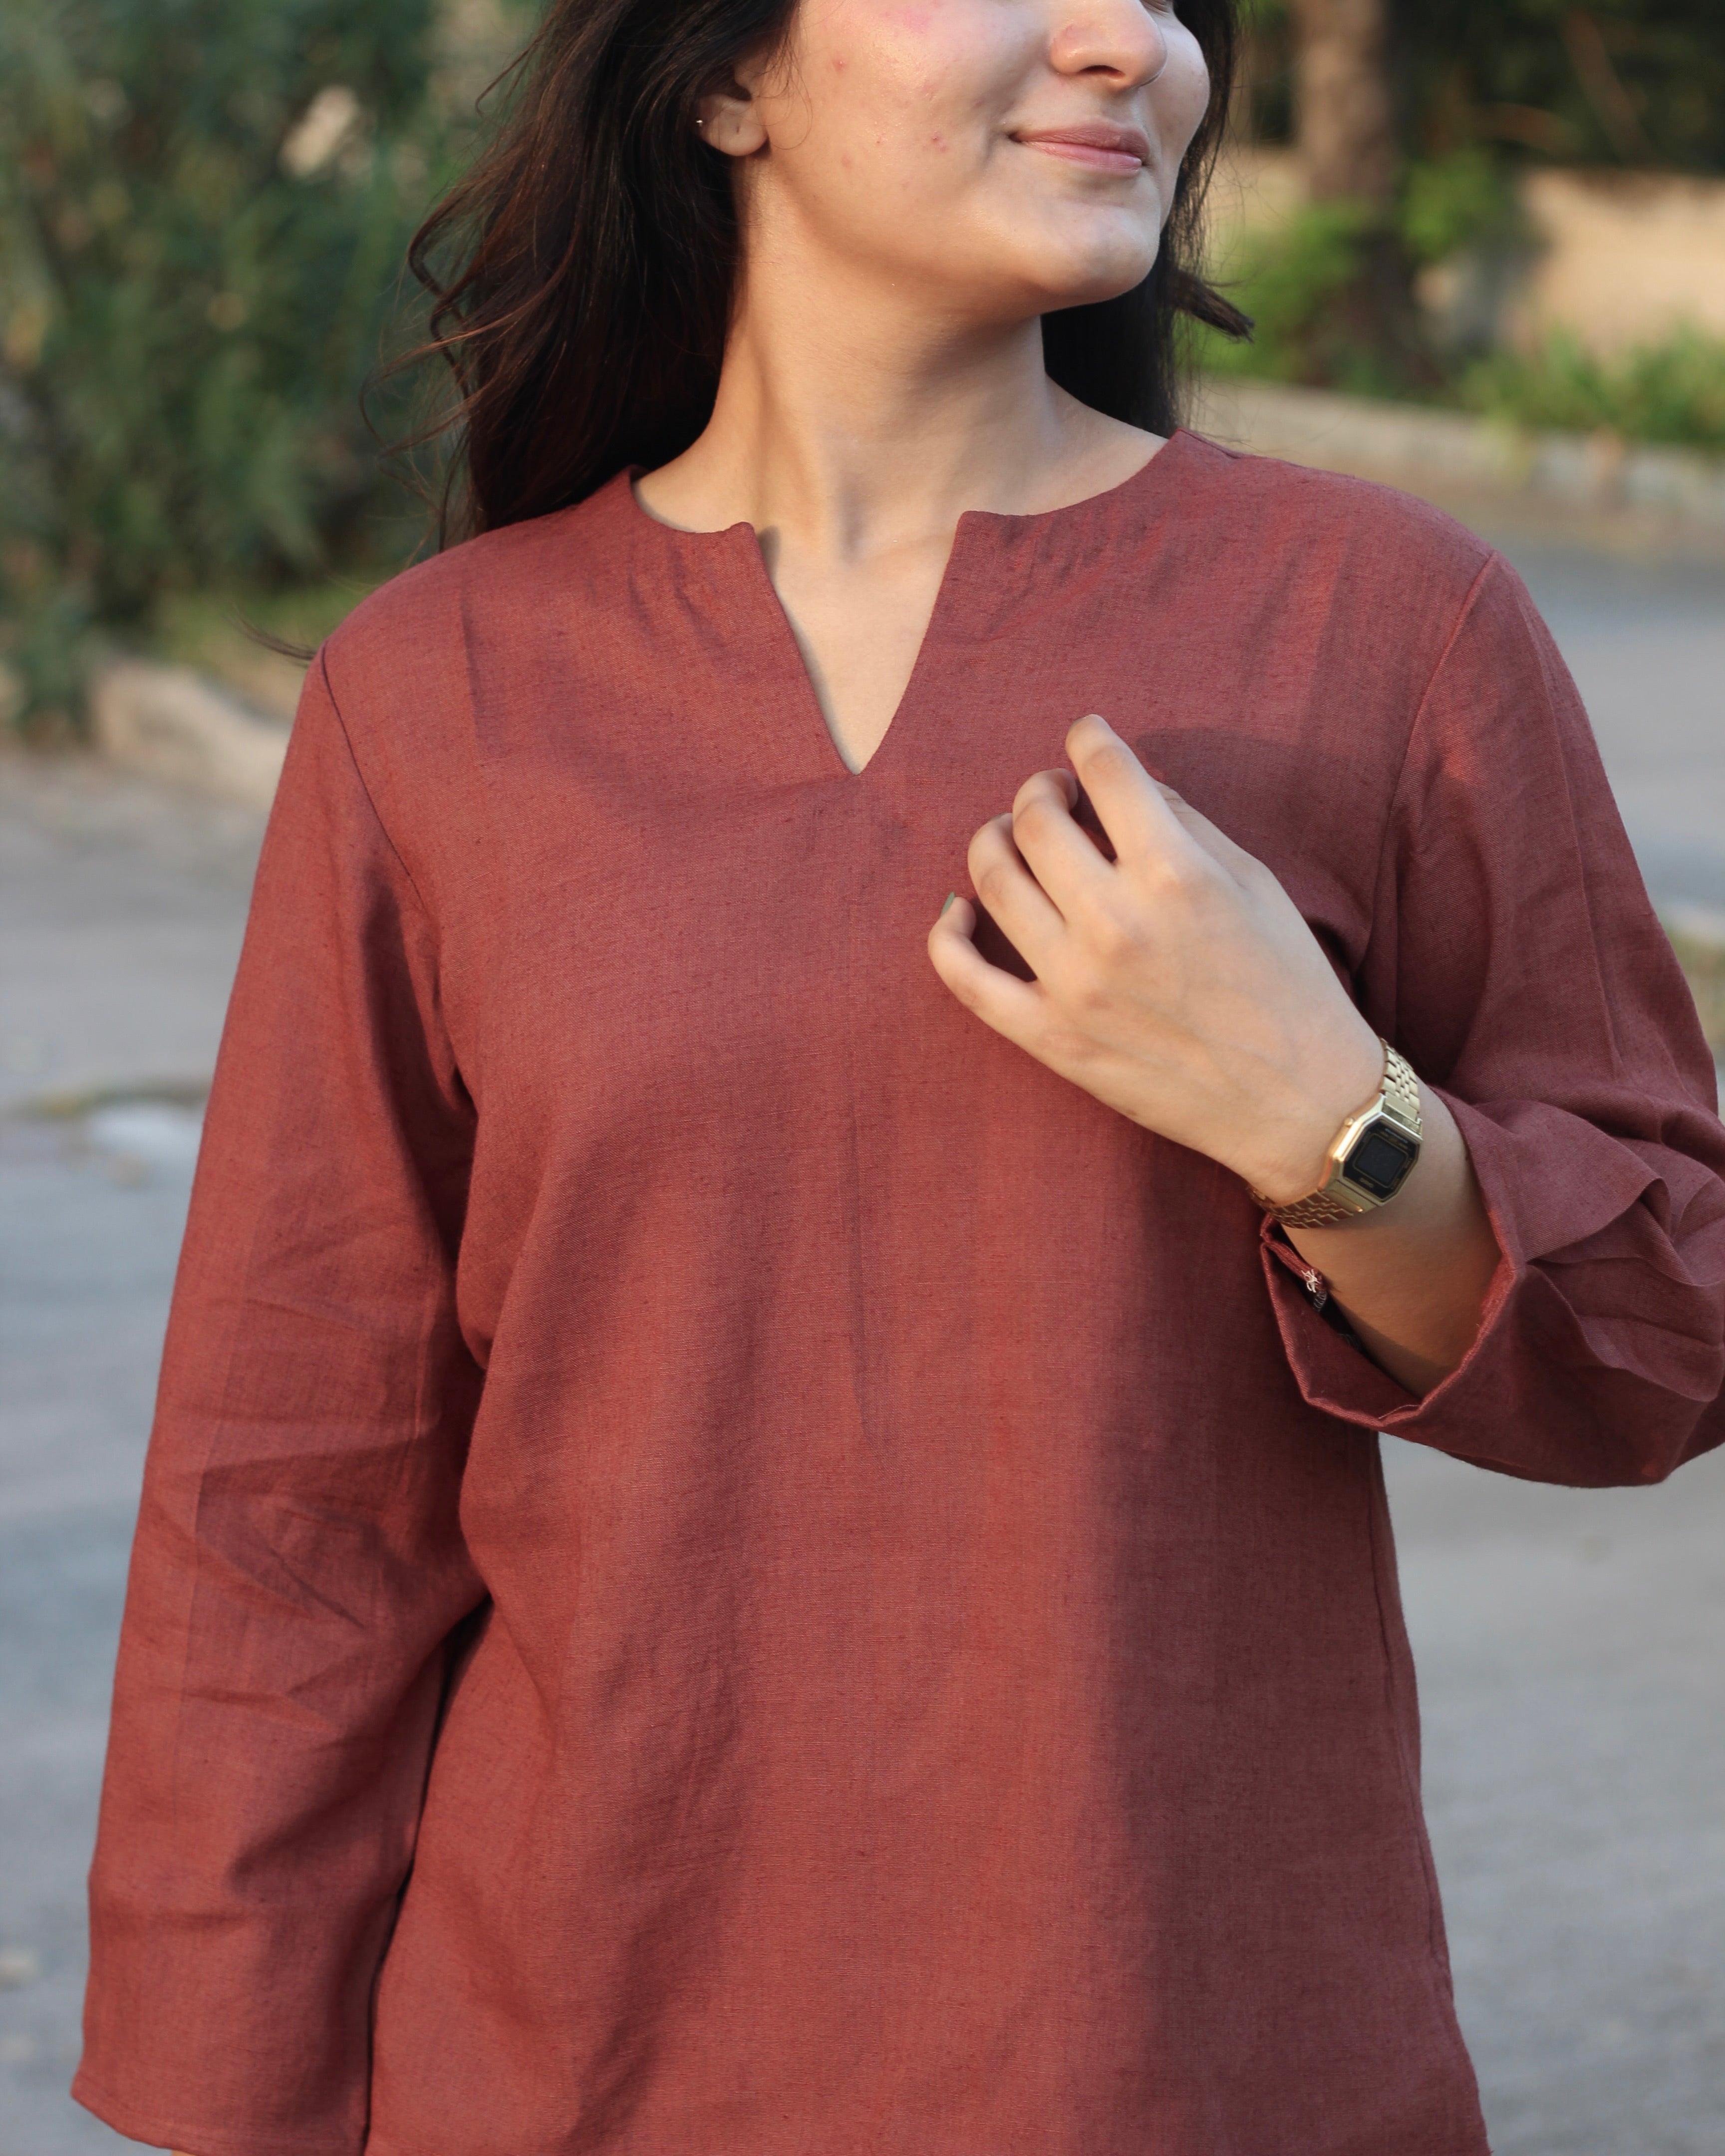 Round with V neck and box sleeves